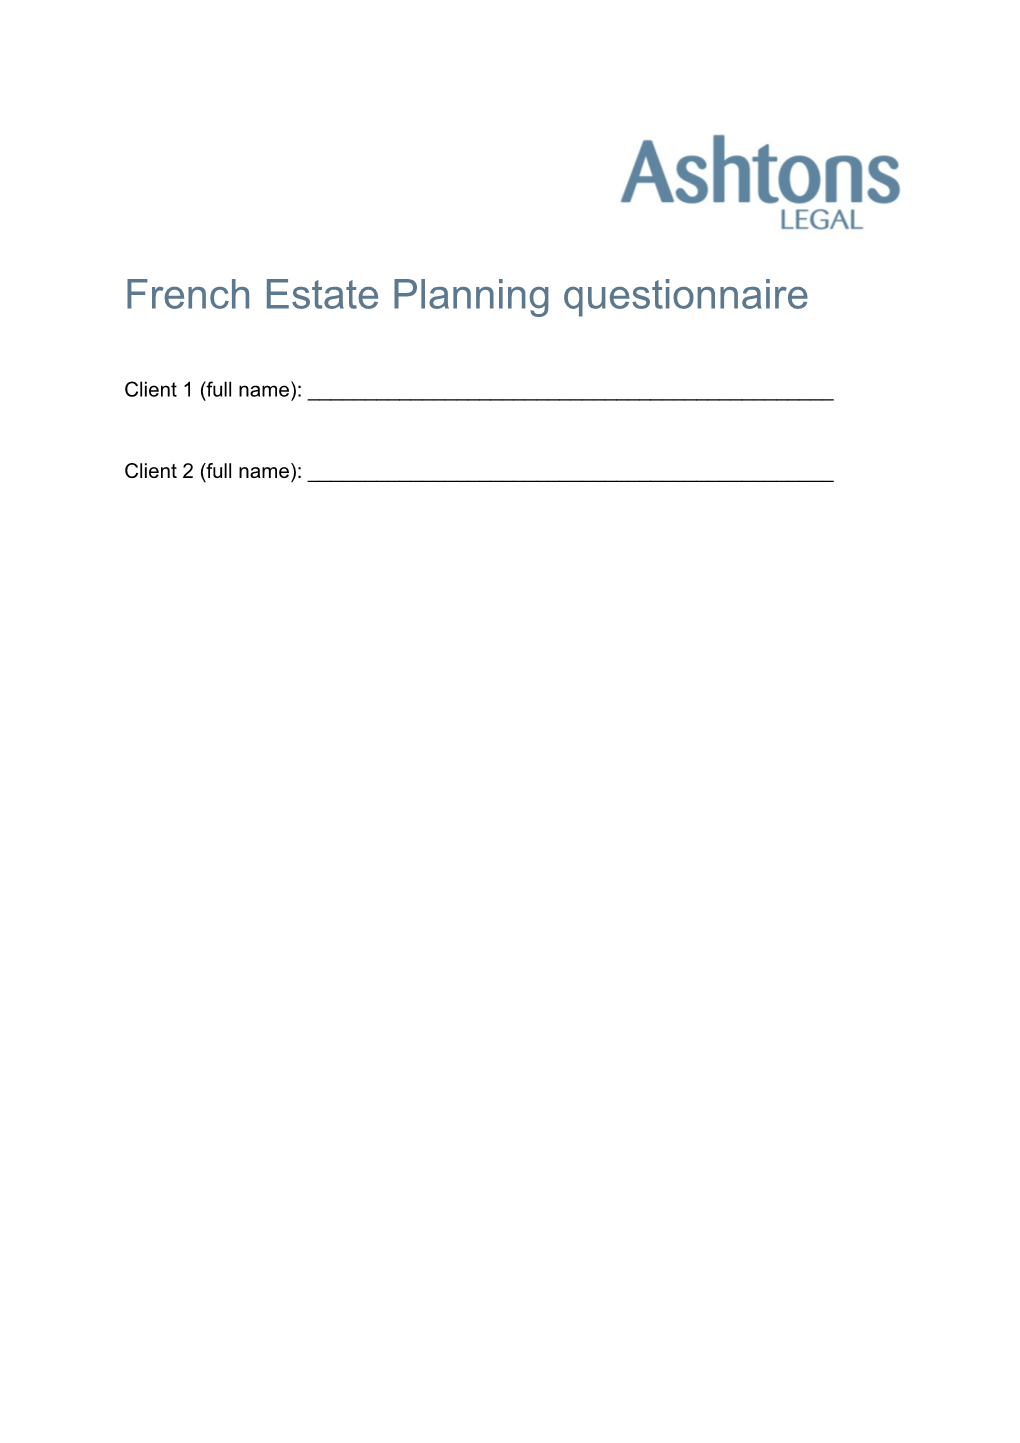 French Estate Planning Questionnaire